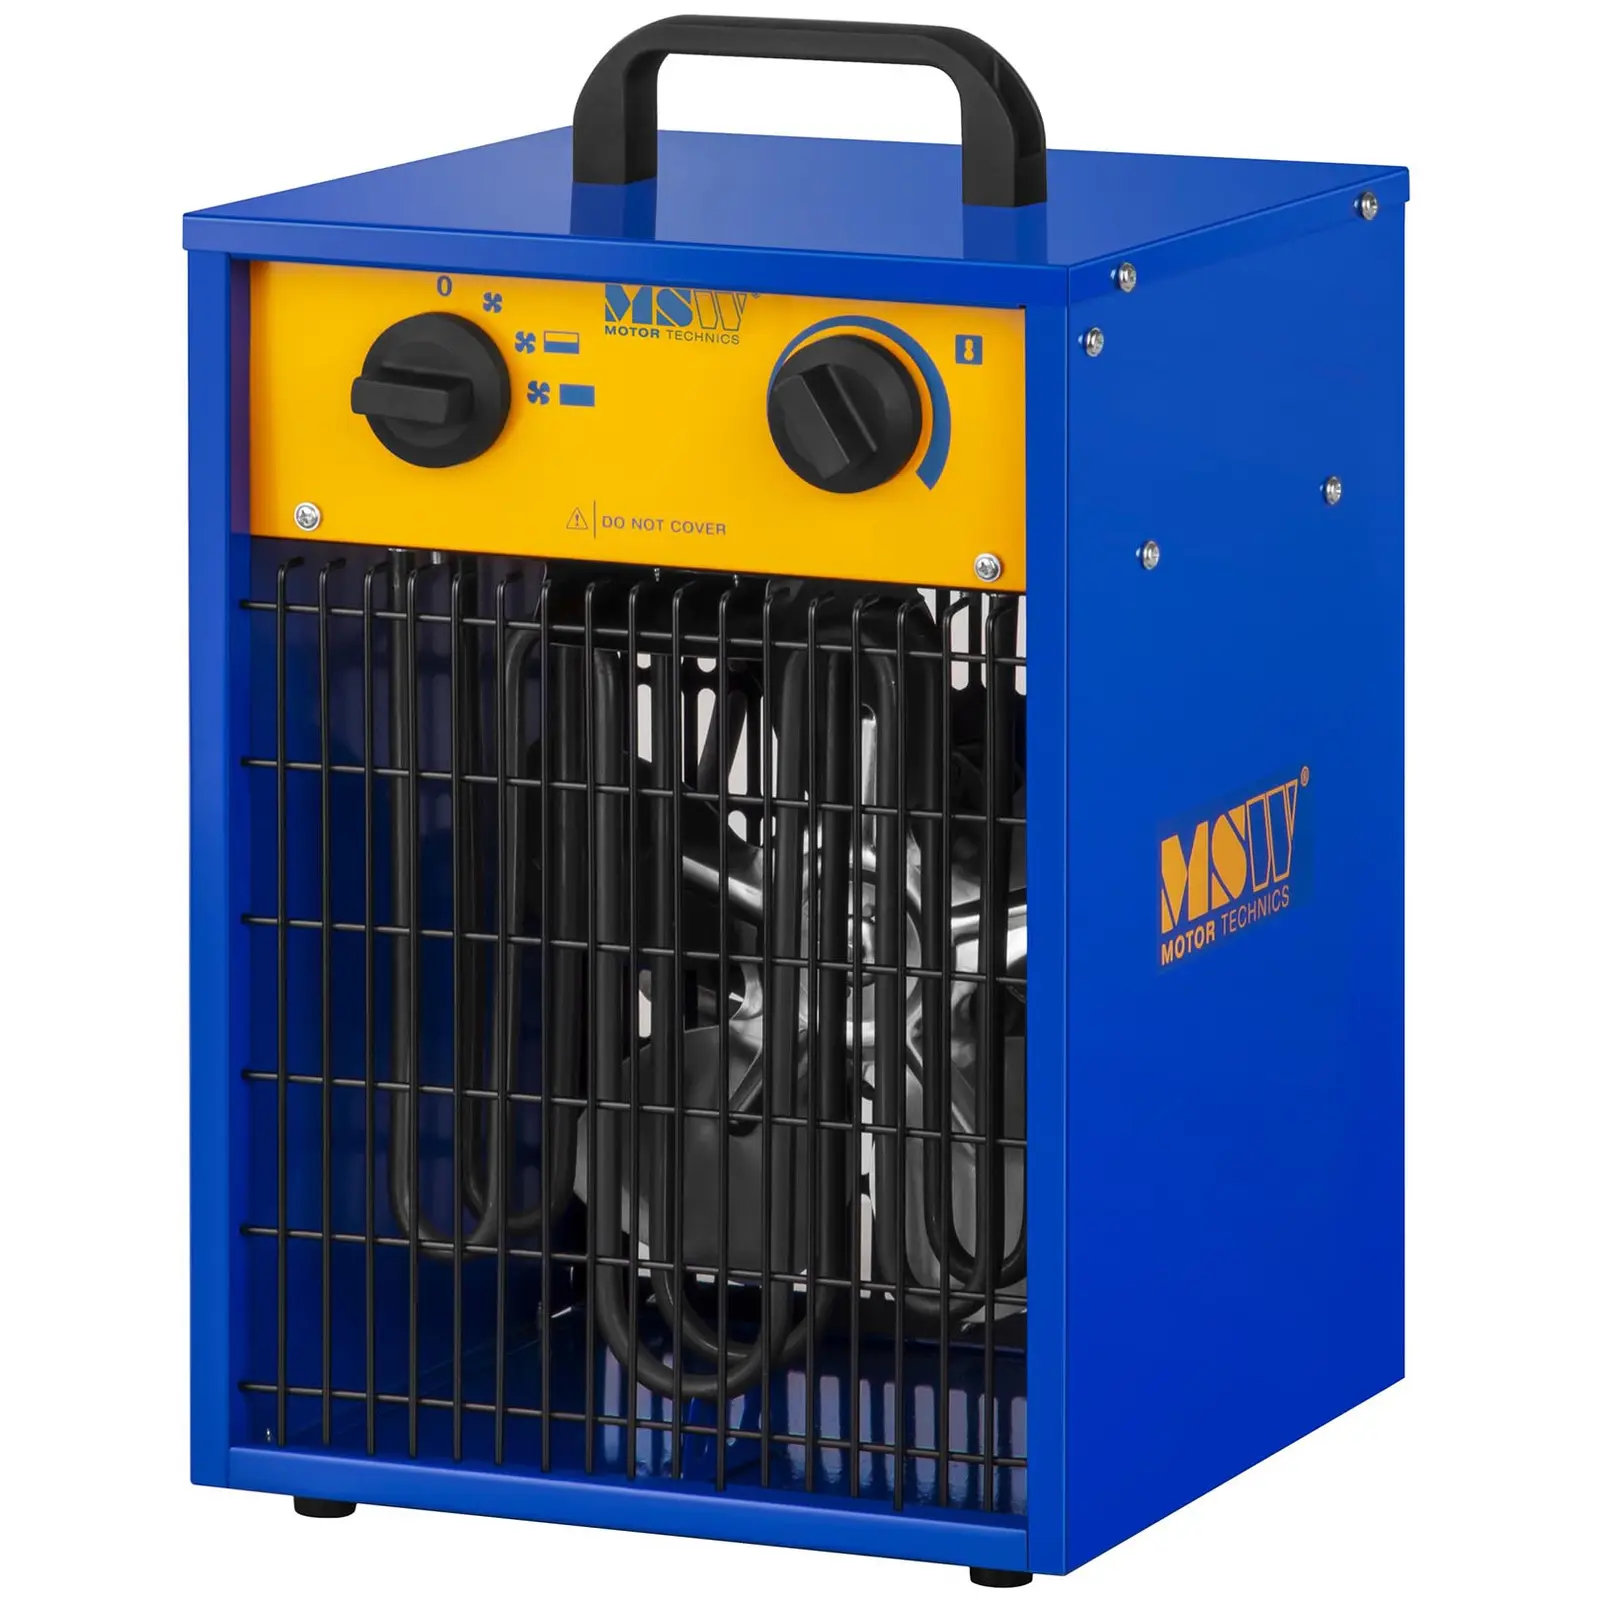 Industrial Electric Heater with Cooling Function - 0 to 85 °C - 3,300 W